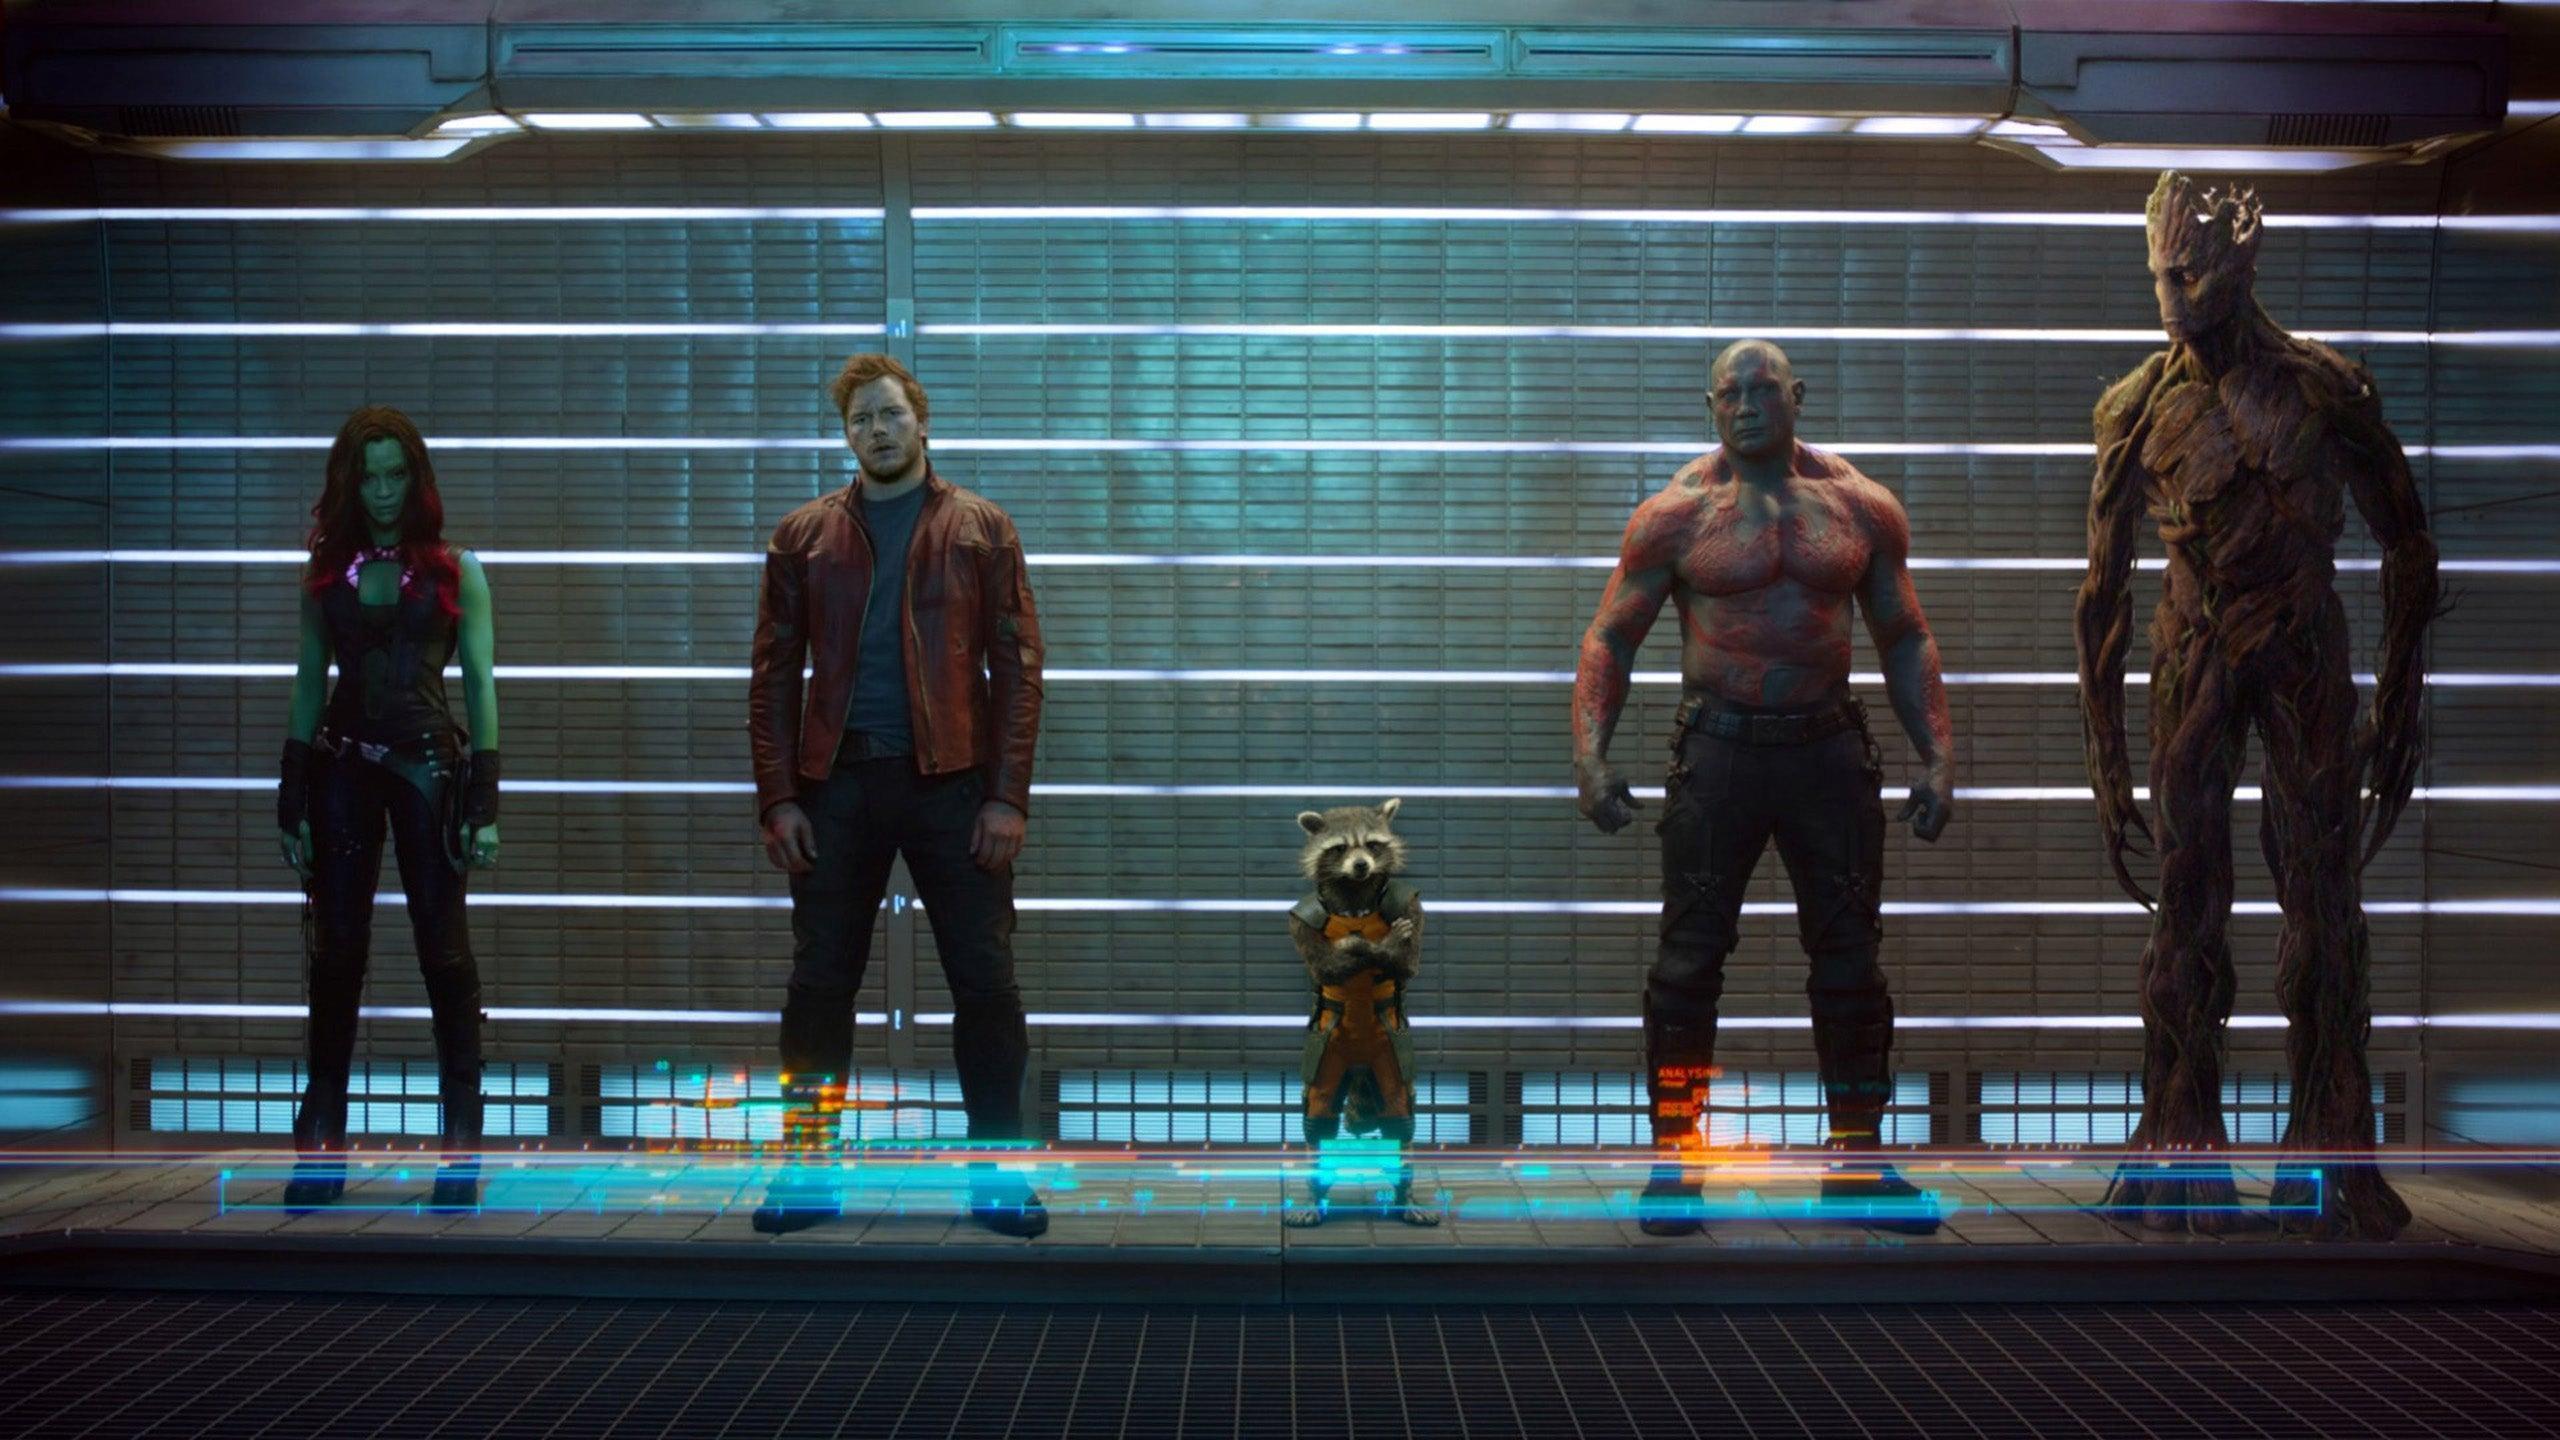 guardians-of-the-galaxy-wallpapers-02-2560x1440-113318.jpg